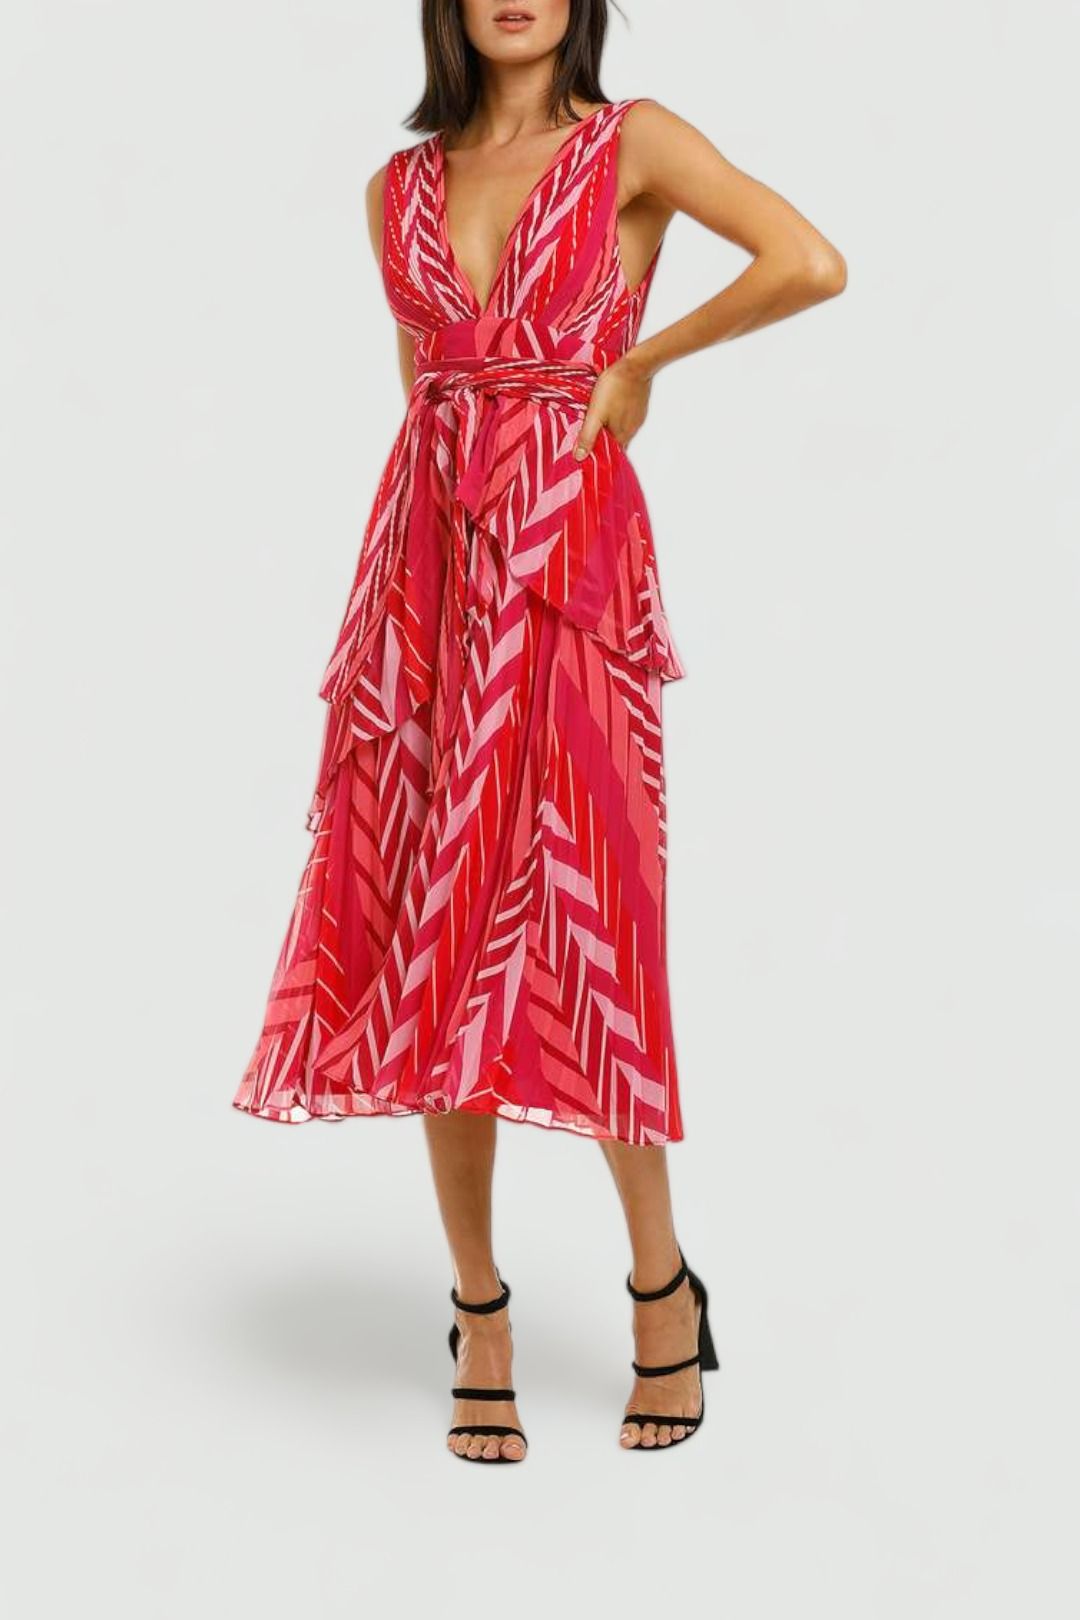 Sugar and Spice Midi Dress in Tango Stripe by Talulah for Hire | GlamCorner